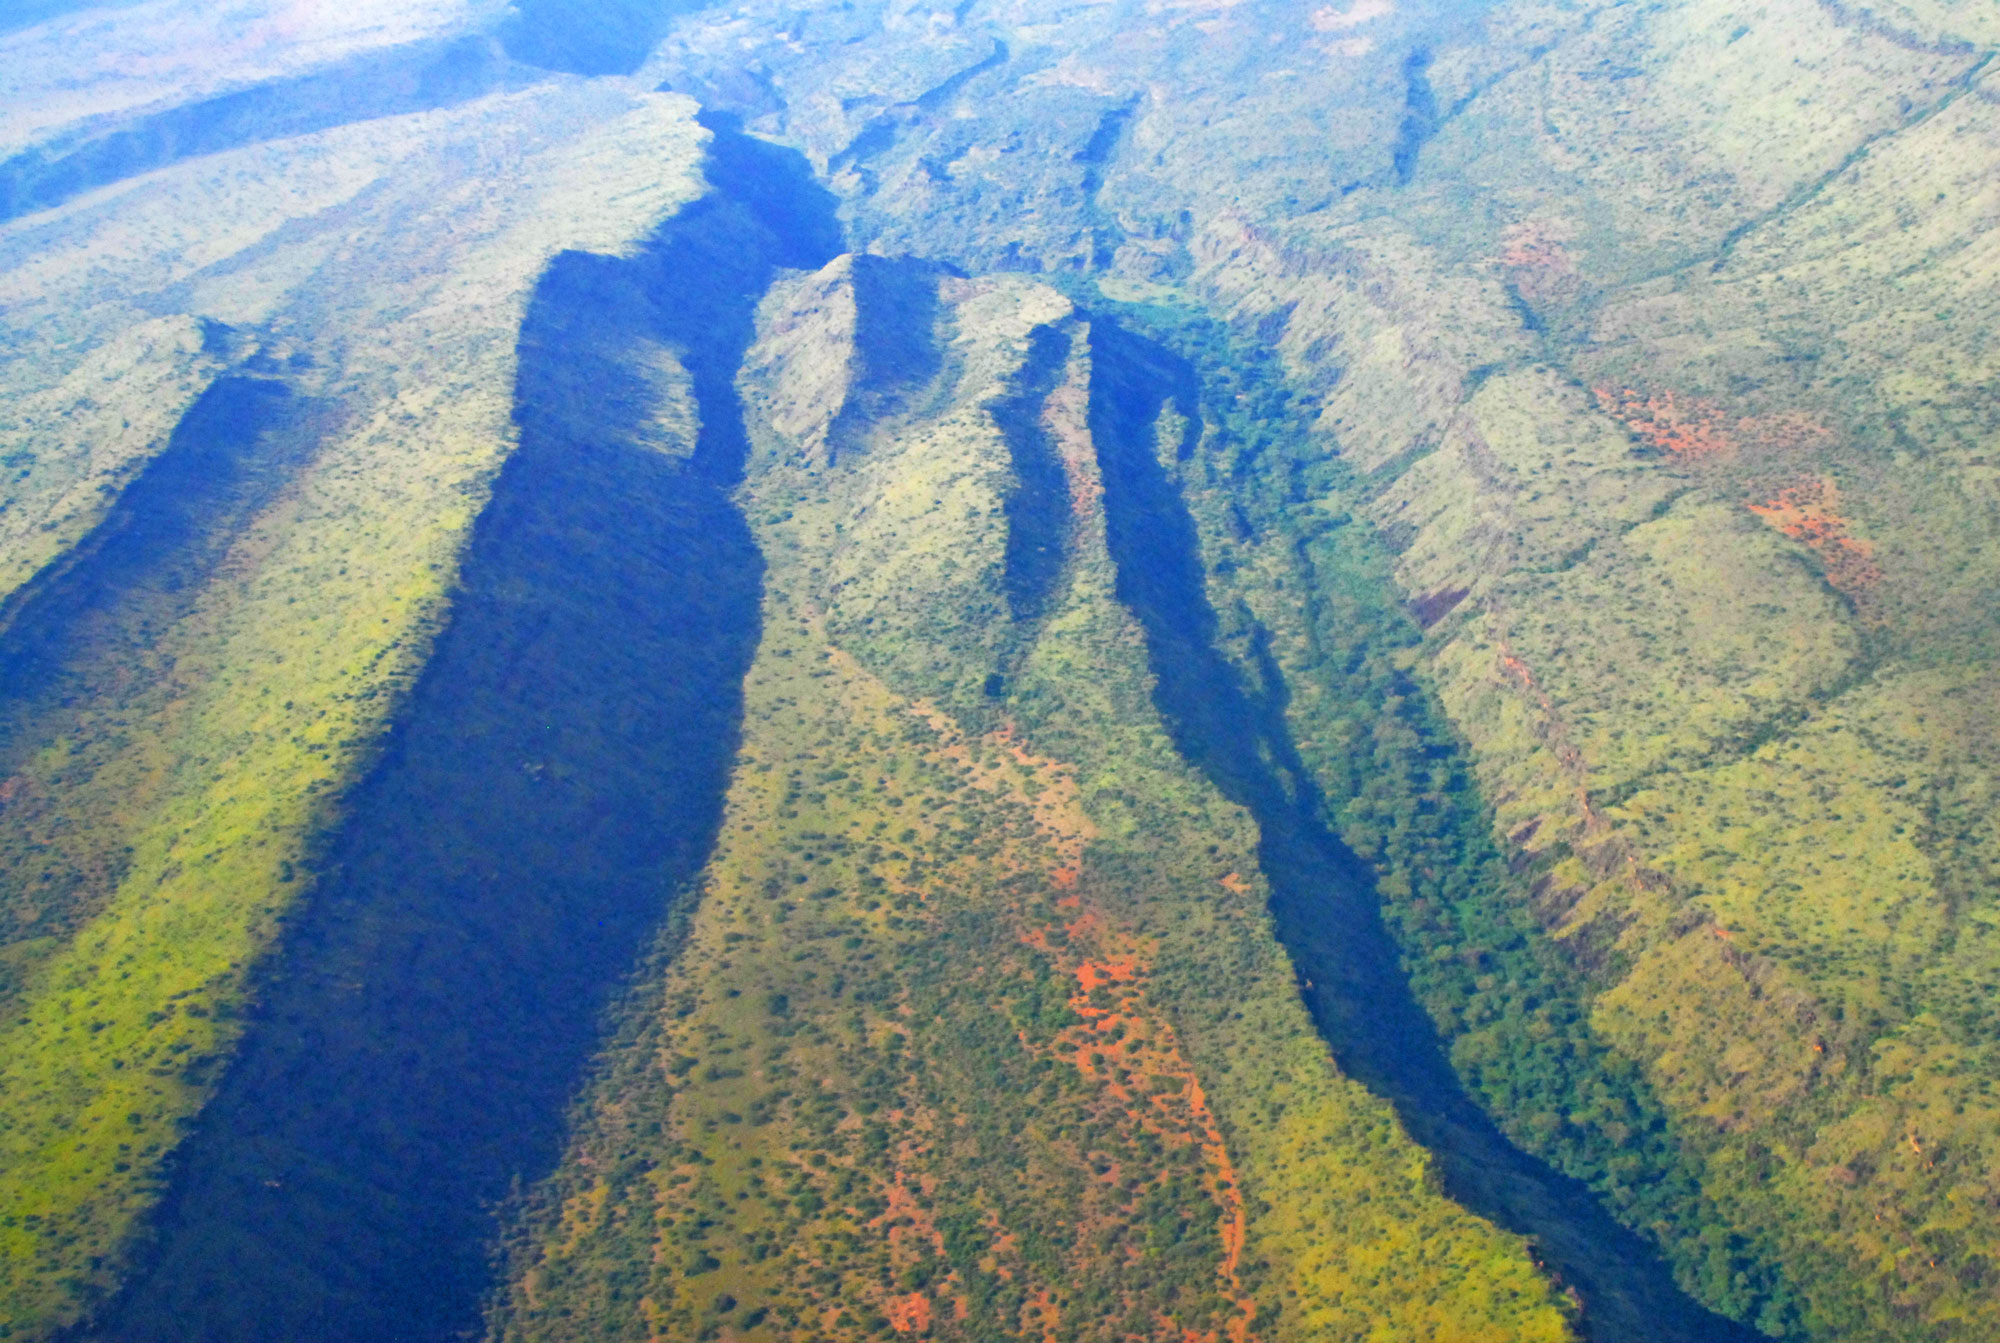 Aerial photo of a rift valley in Kenya. The valley is elongated with steep, parallel sides.